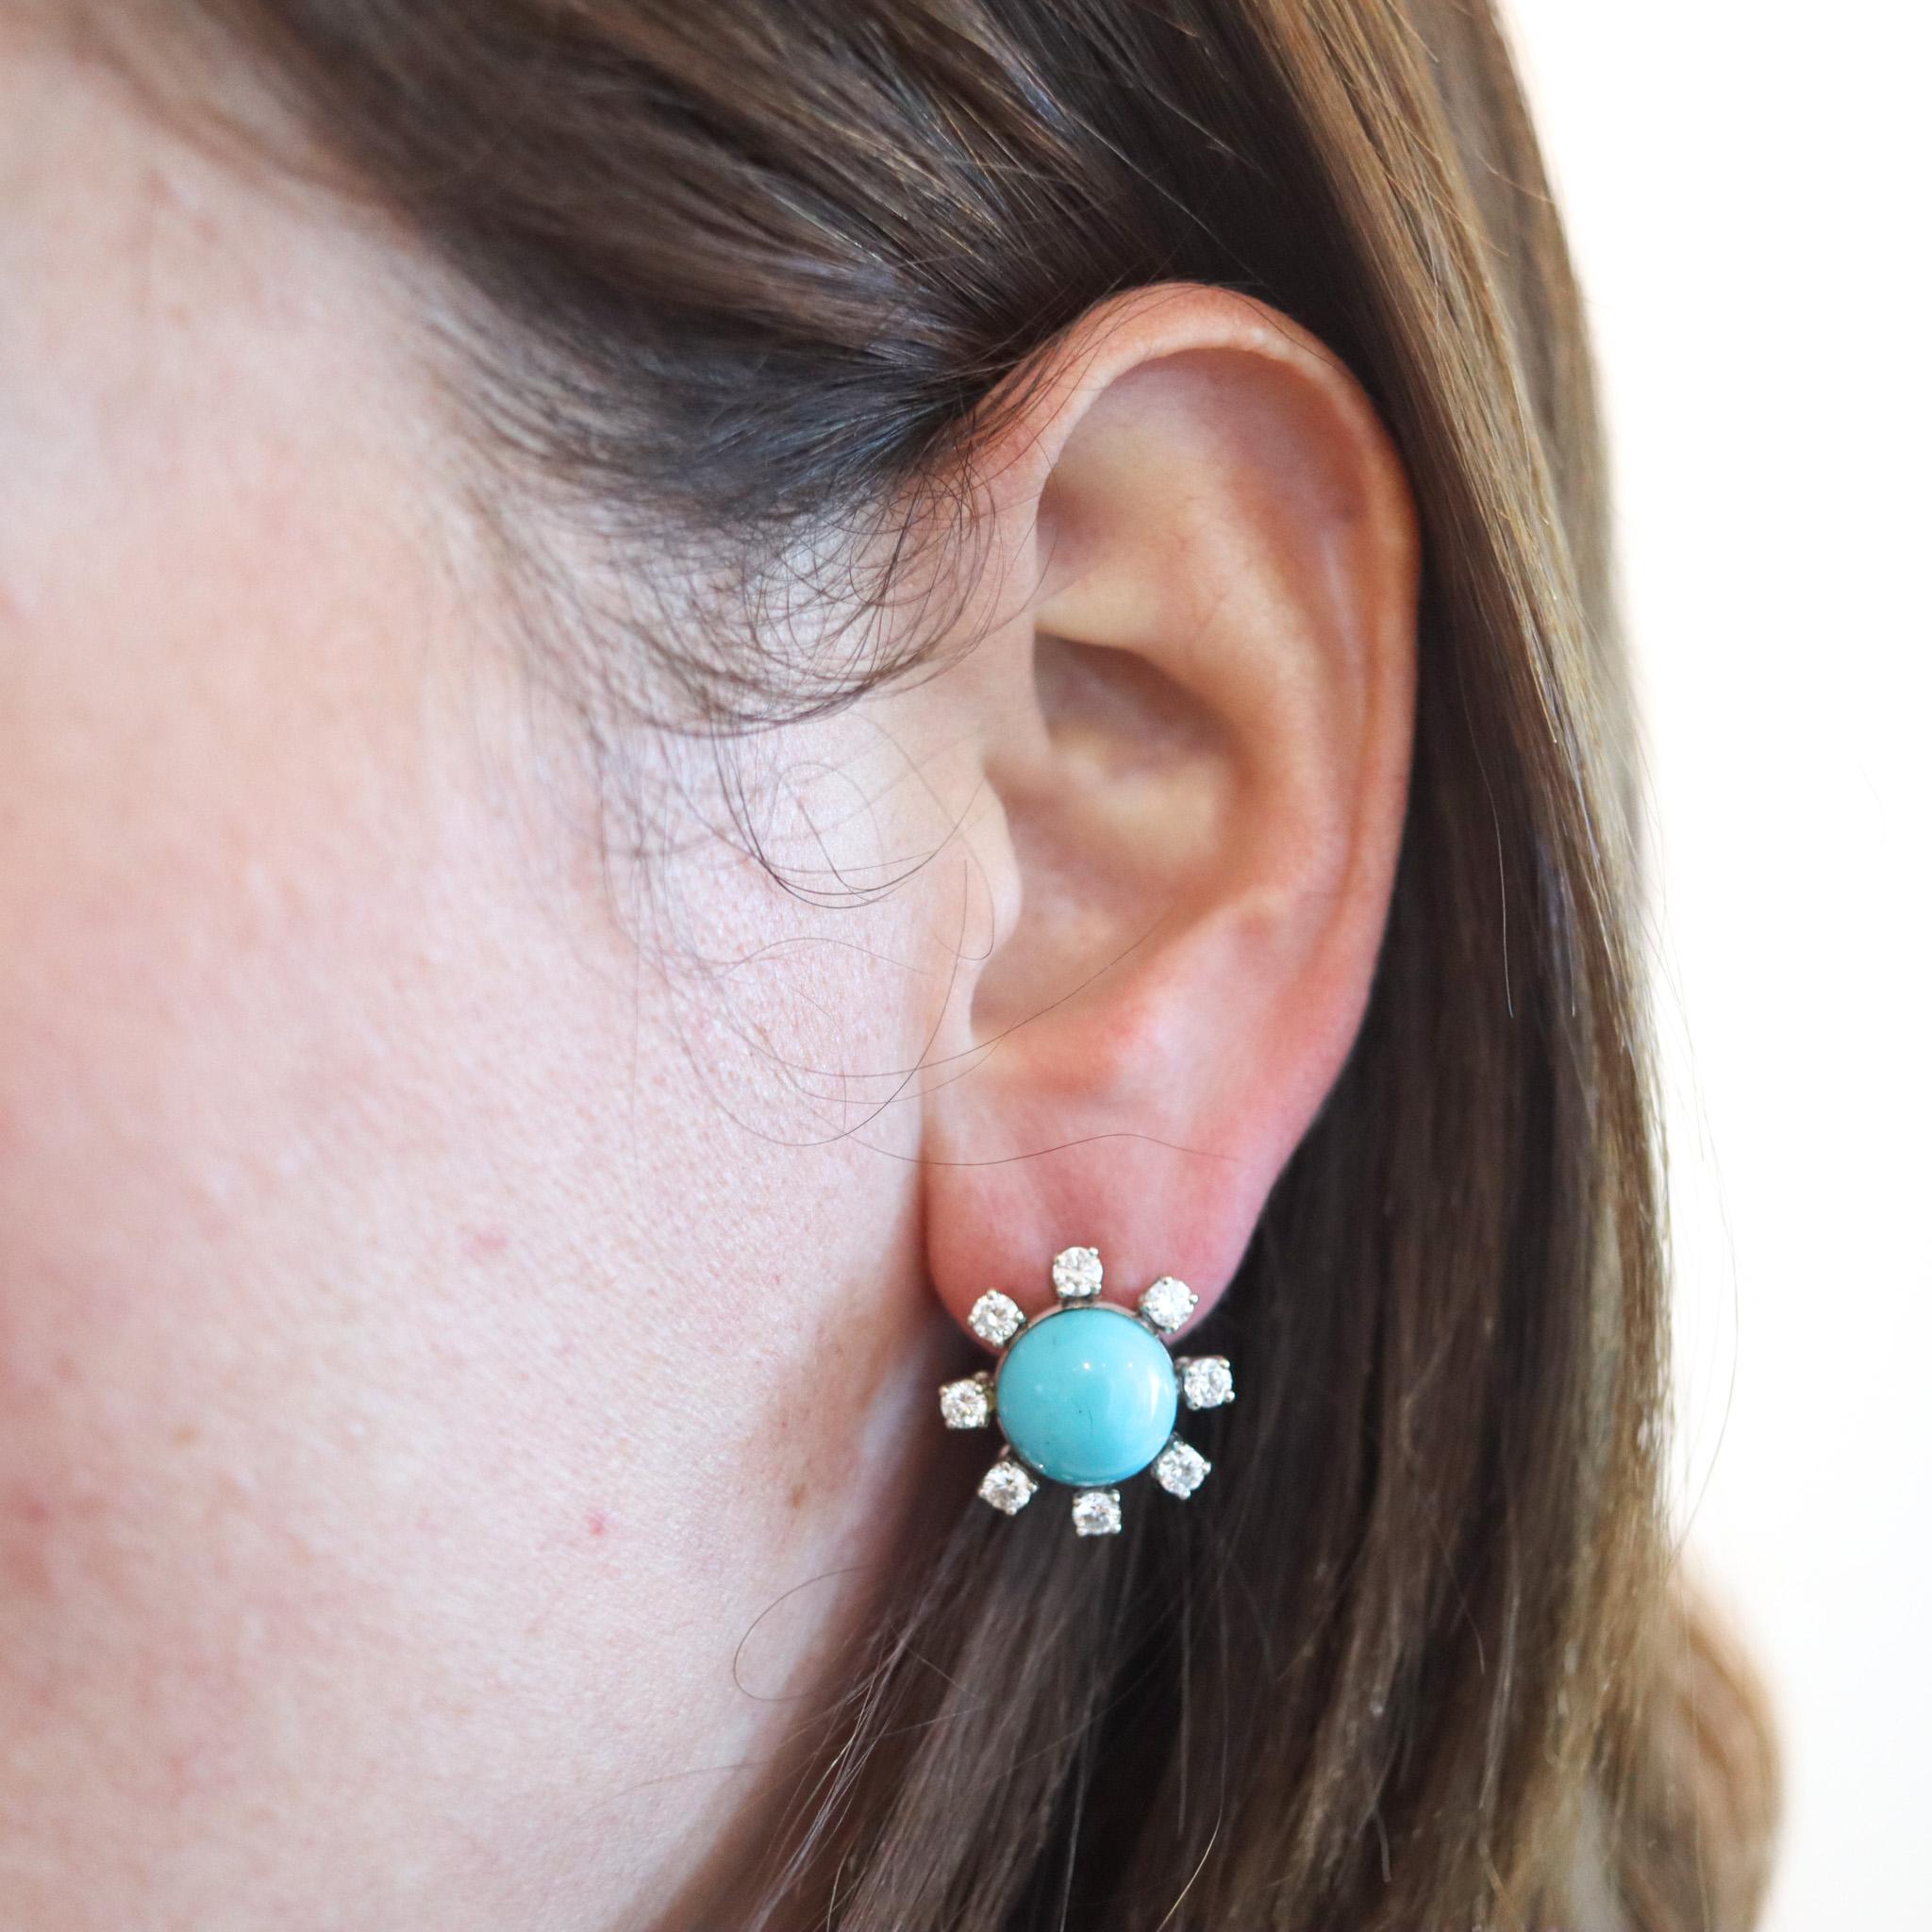 French 1960 Modernist Earrings In 18Kt Gold With 12.98 Ctw Diamonds & Turquoises For Sale 1